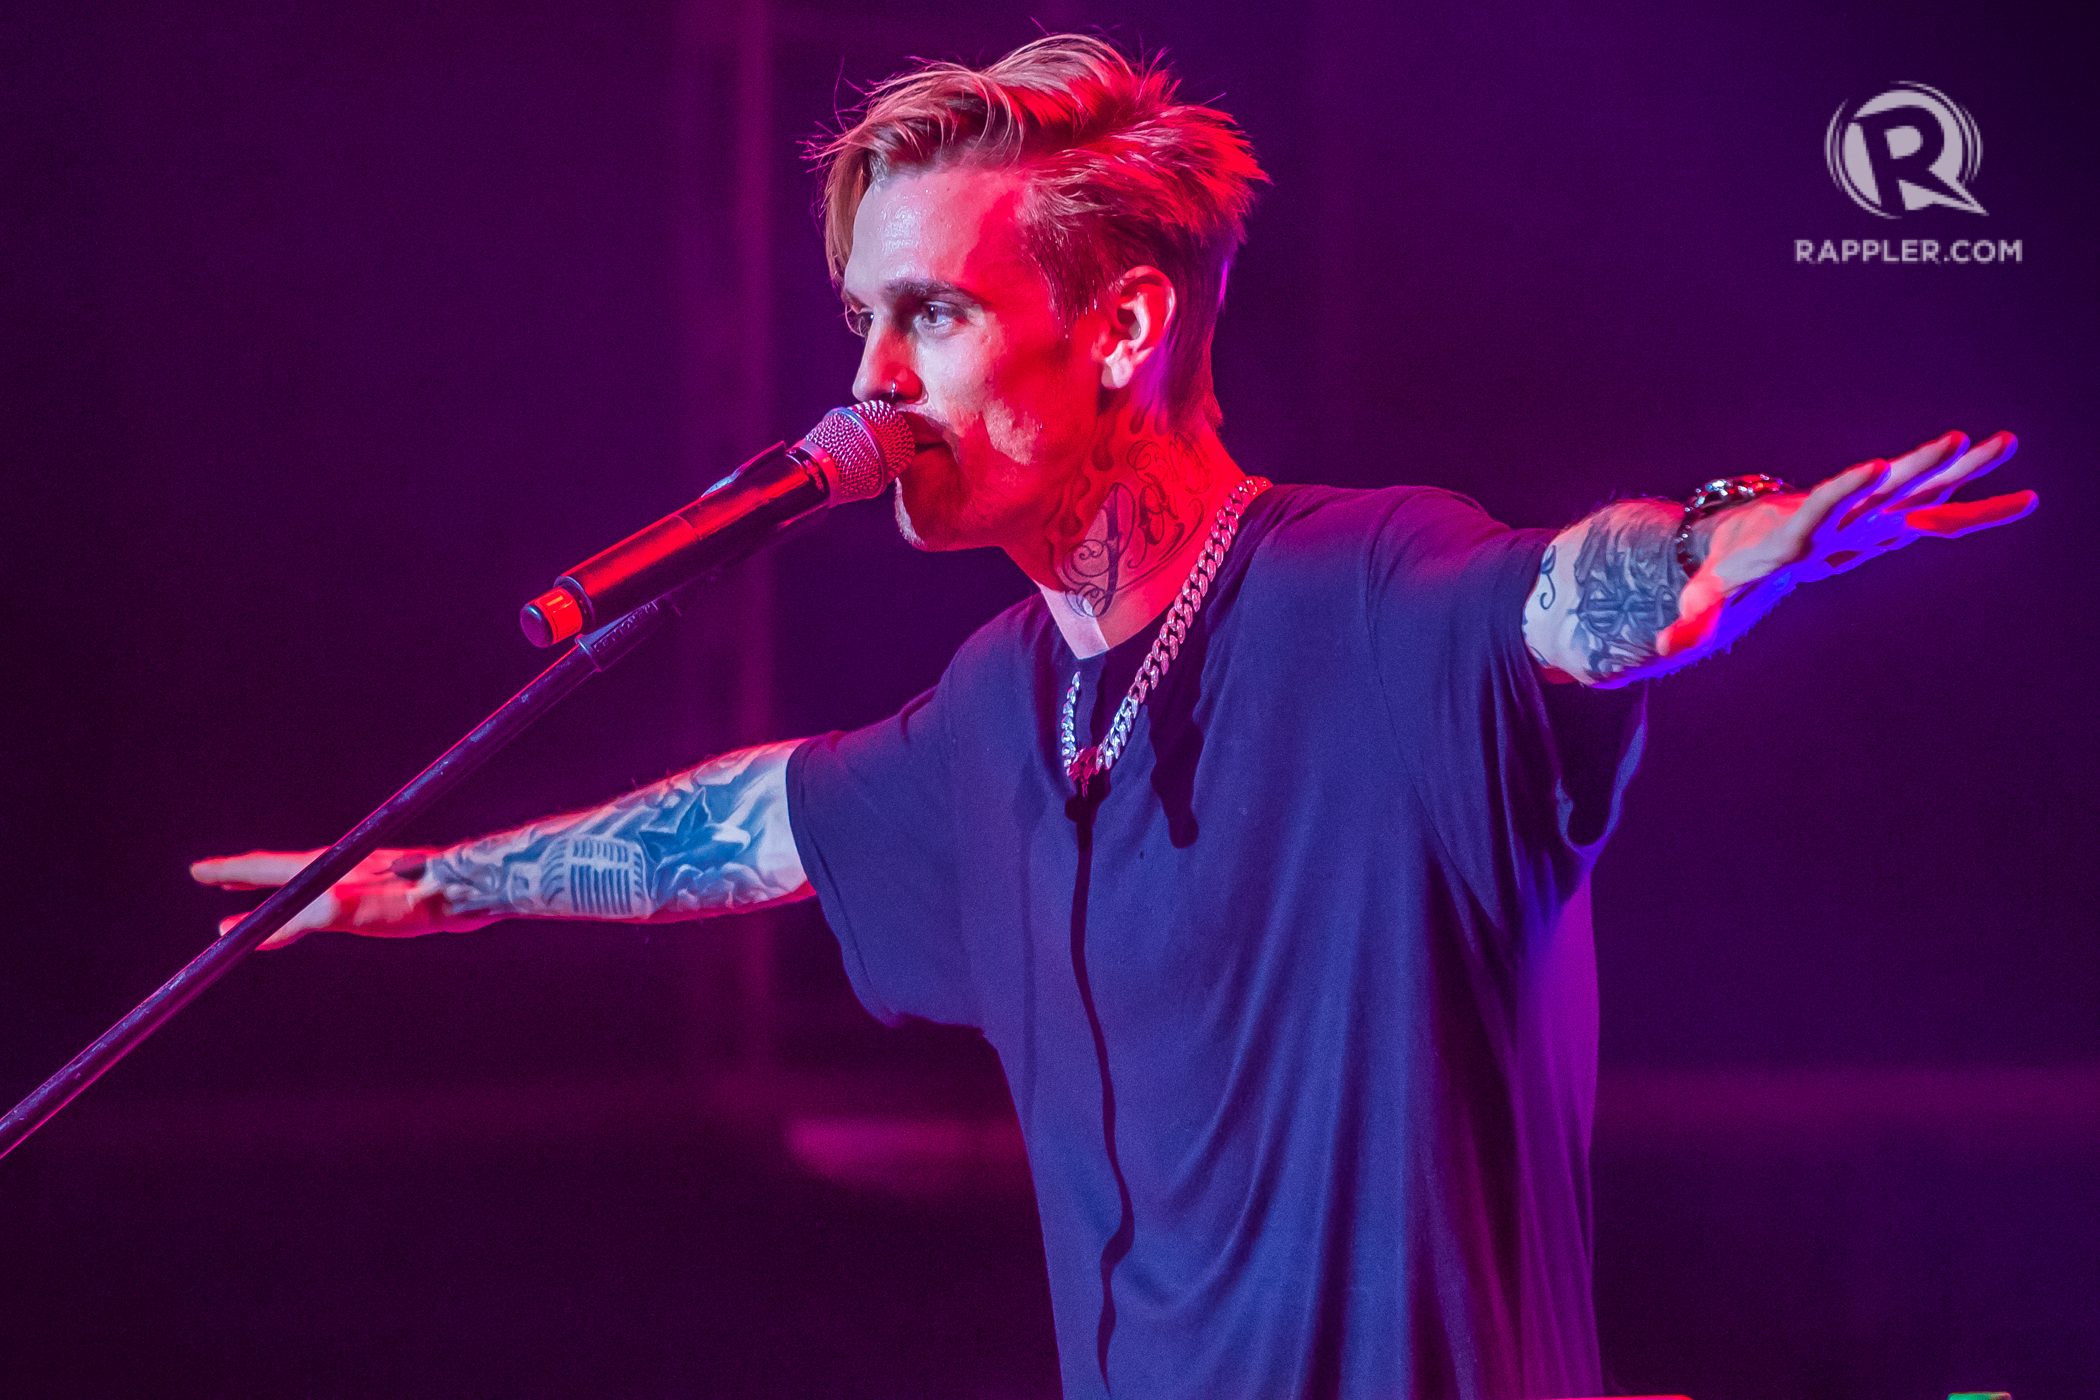 NO MORE CANDY. Aaron Carter shows that's he doing well after the struggles he's gone through in showbiz   